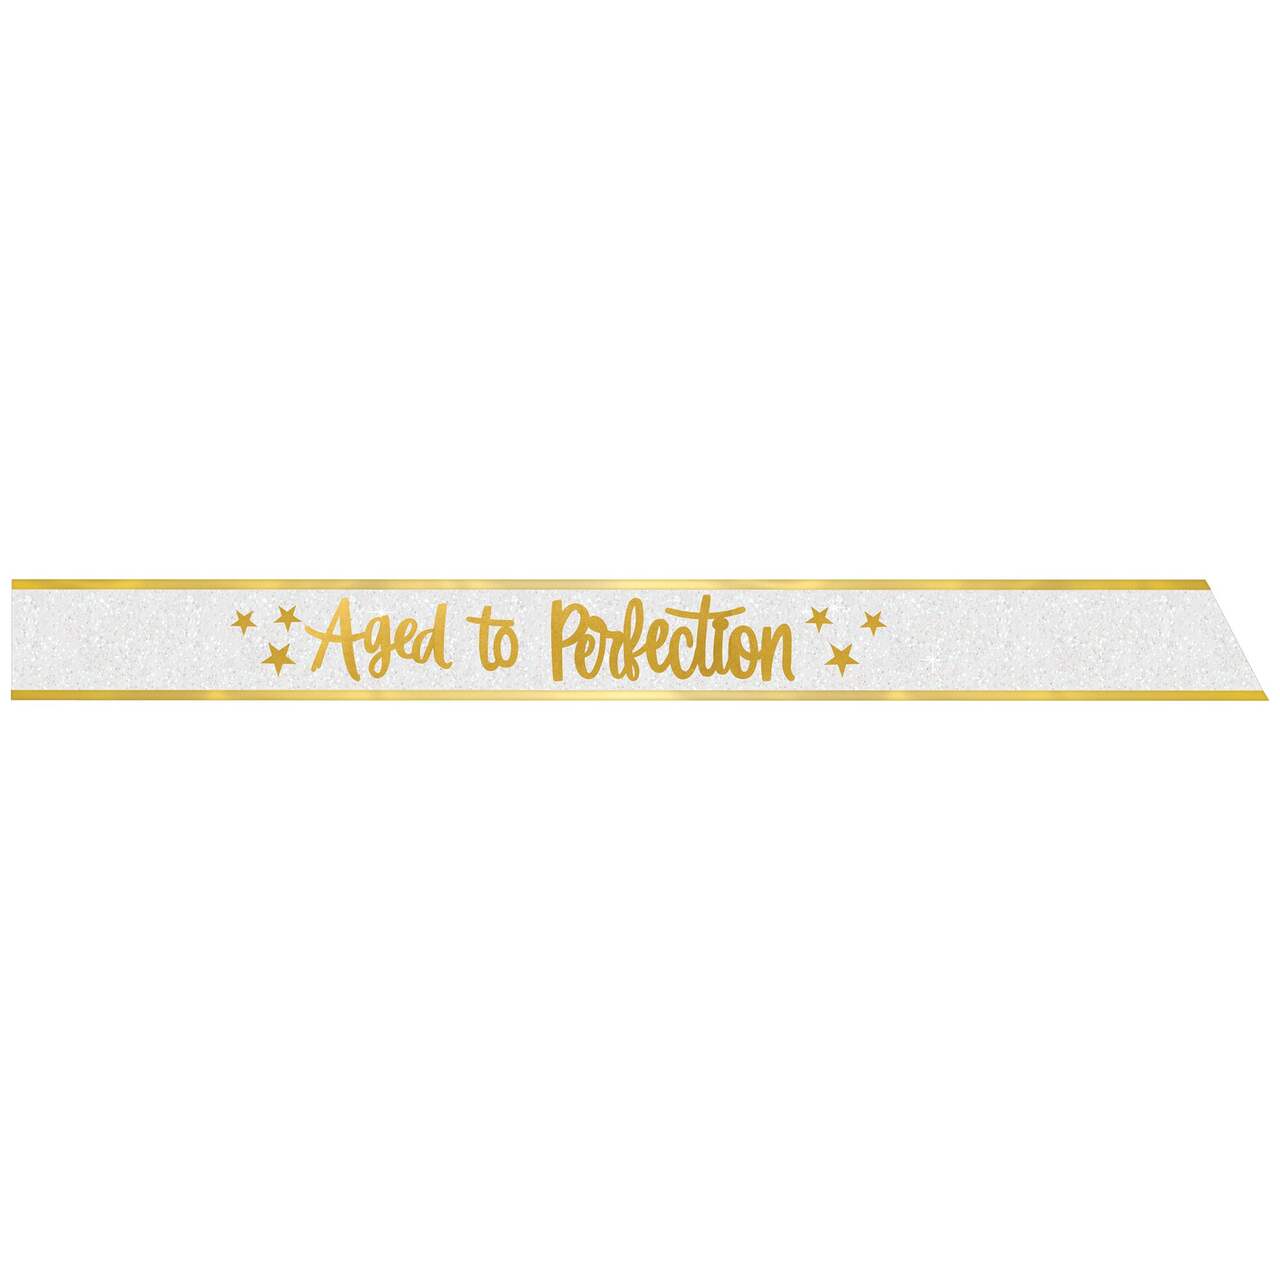 Golden Age Aged to Perfection Glitter Sash, White/Gold, One Size,  Wearable Accessory for Birthdays